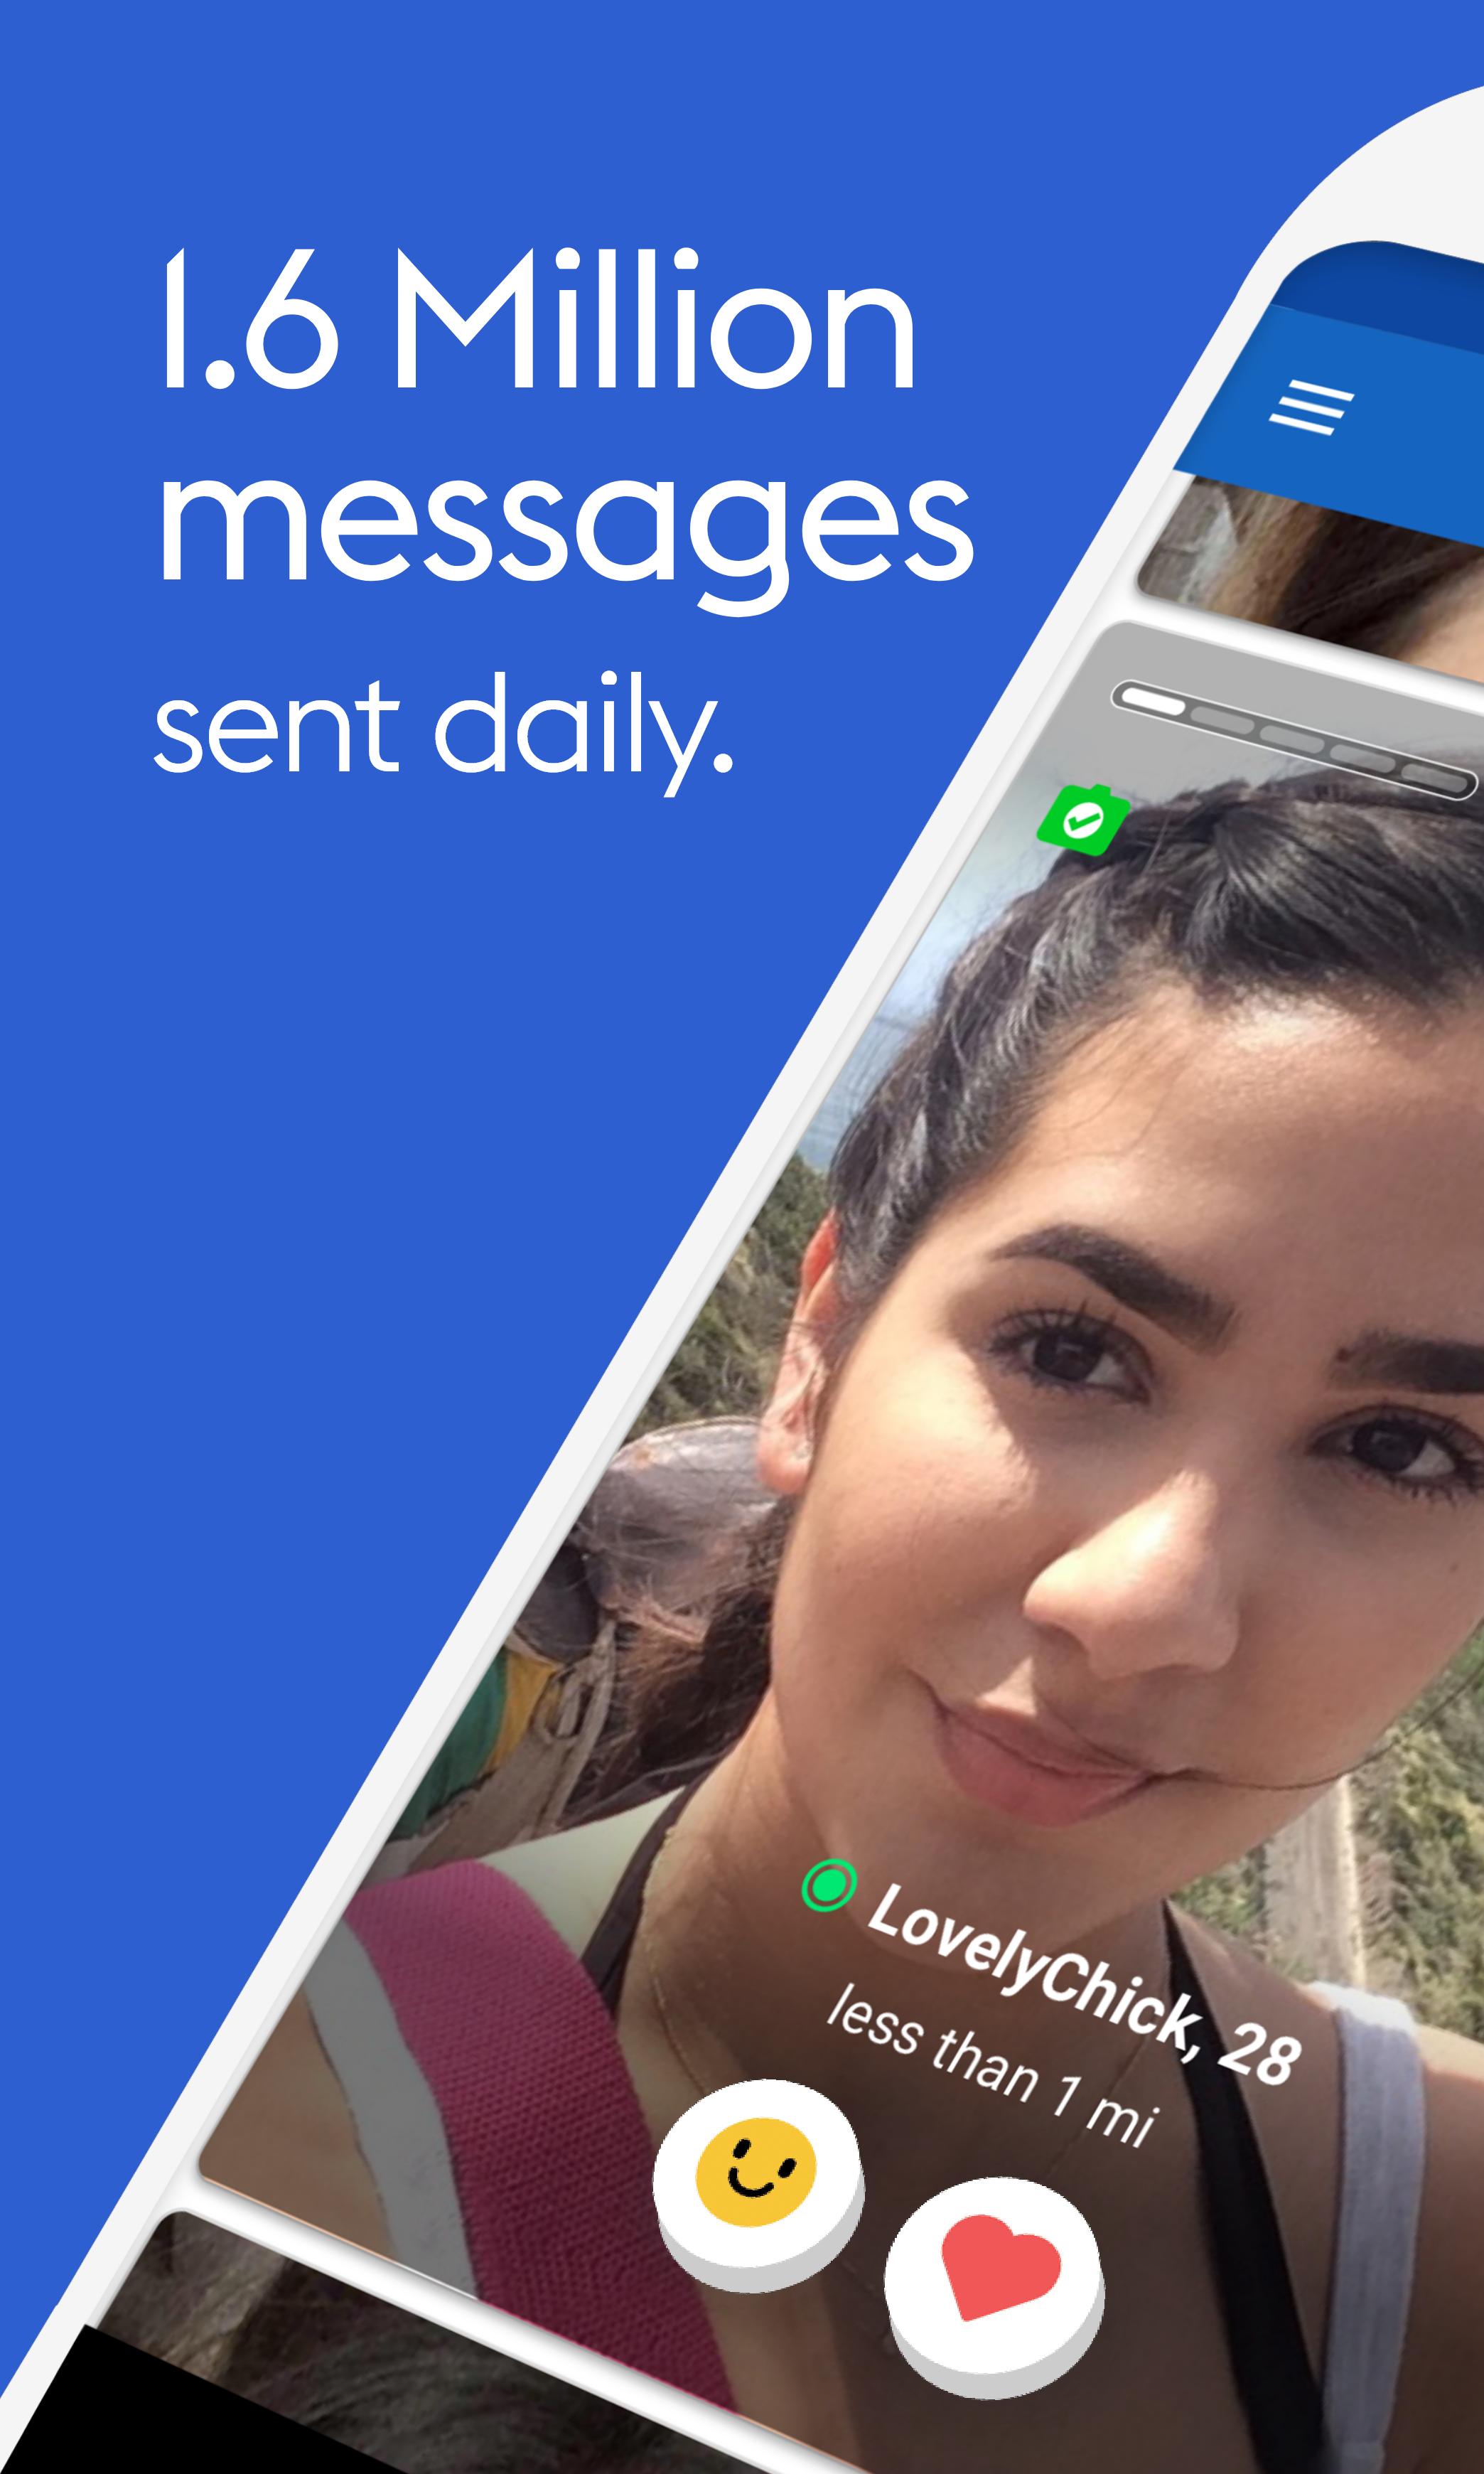 Vs message chat zoosk Here is